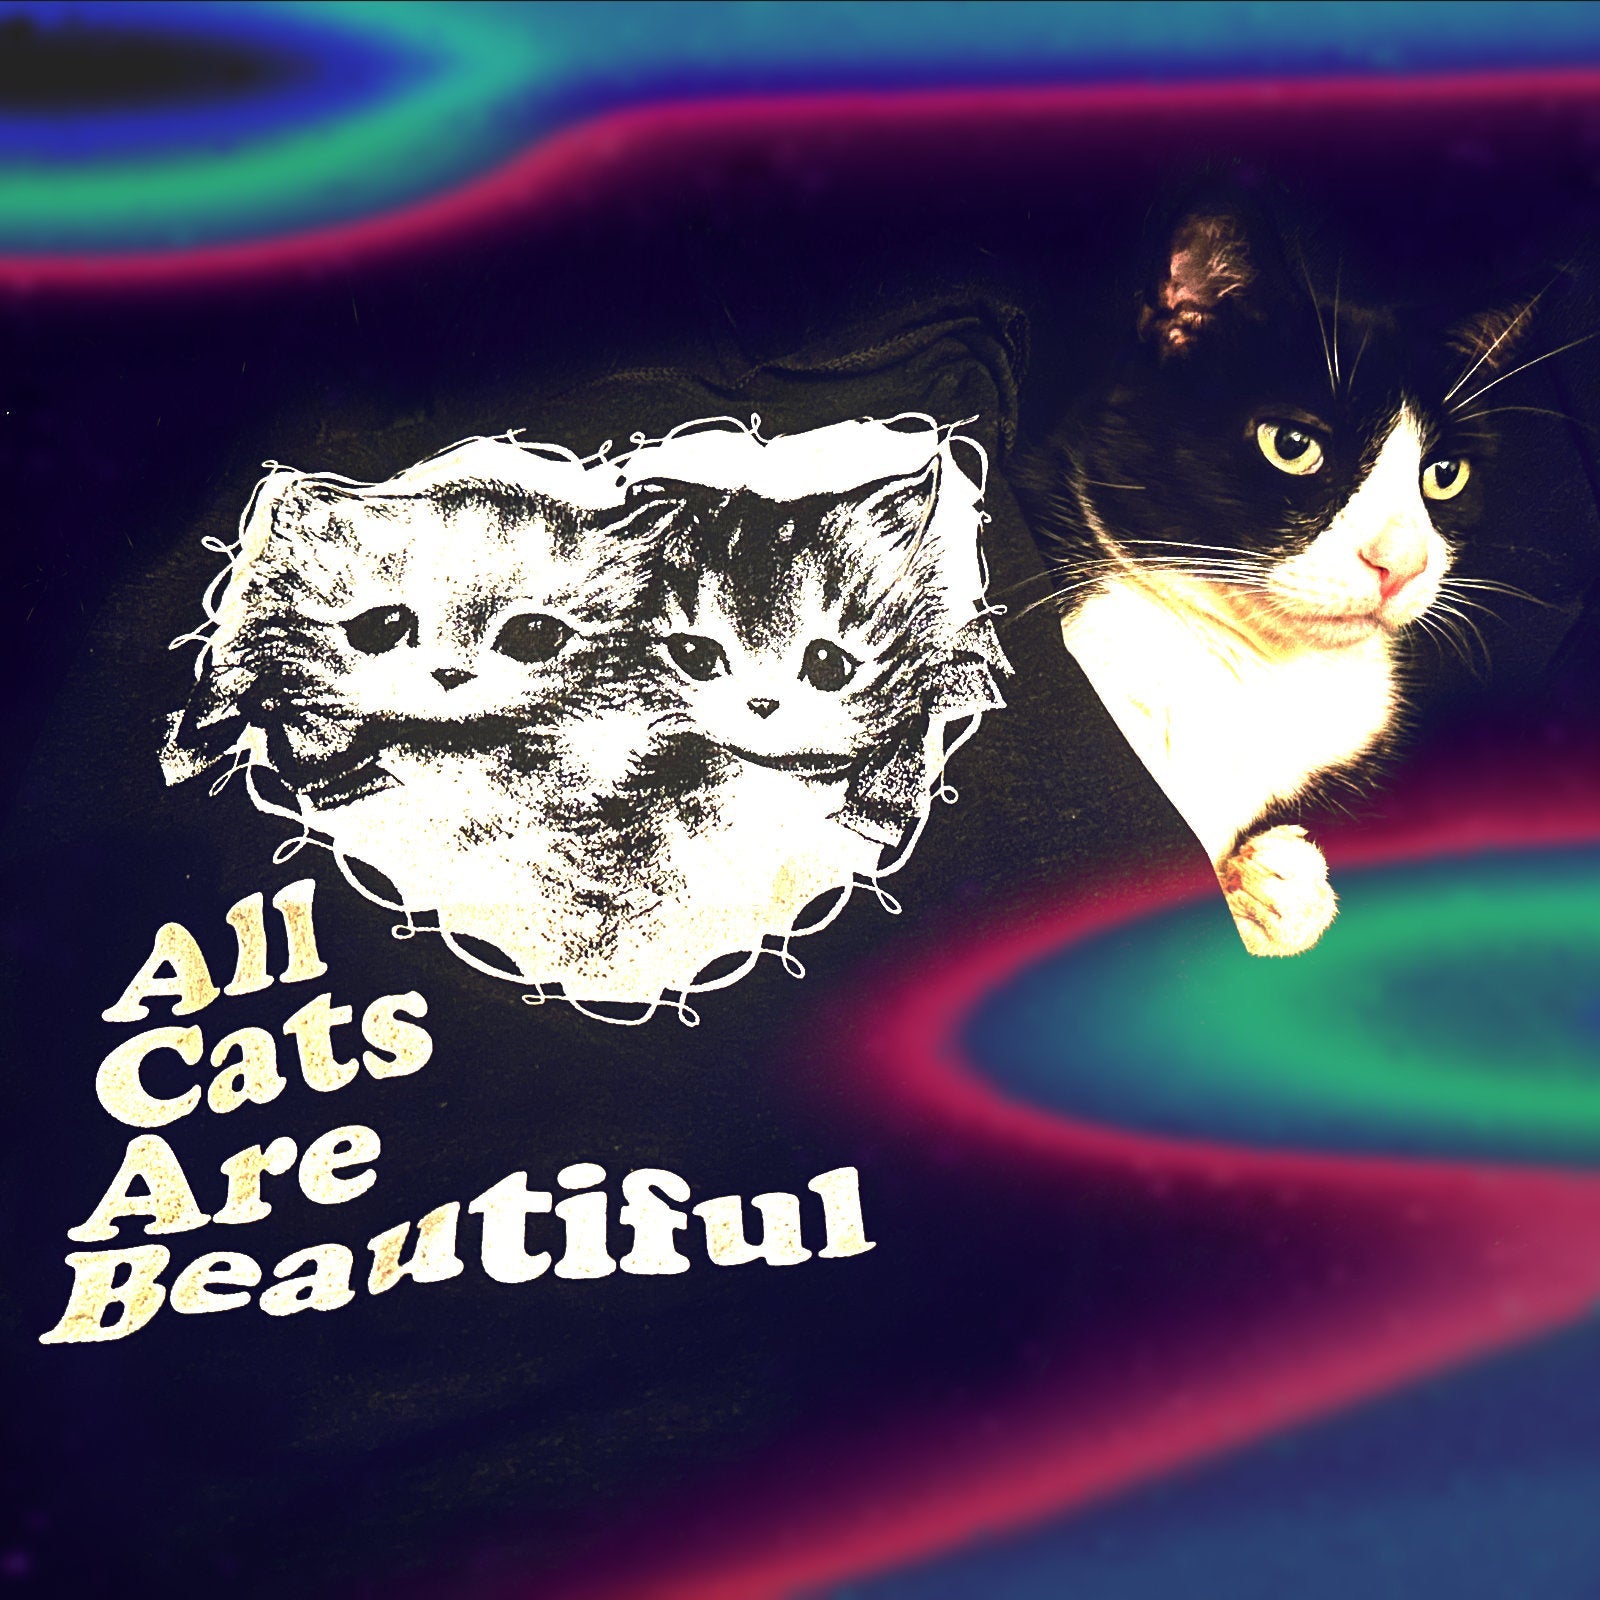 All Cats Are Beautiful Premium Tee